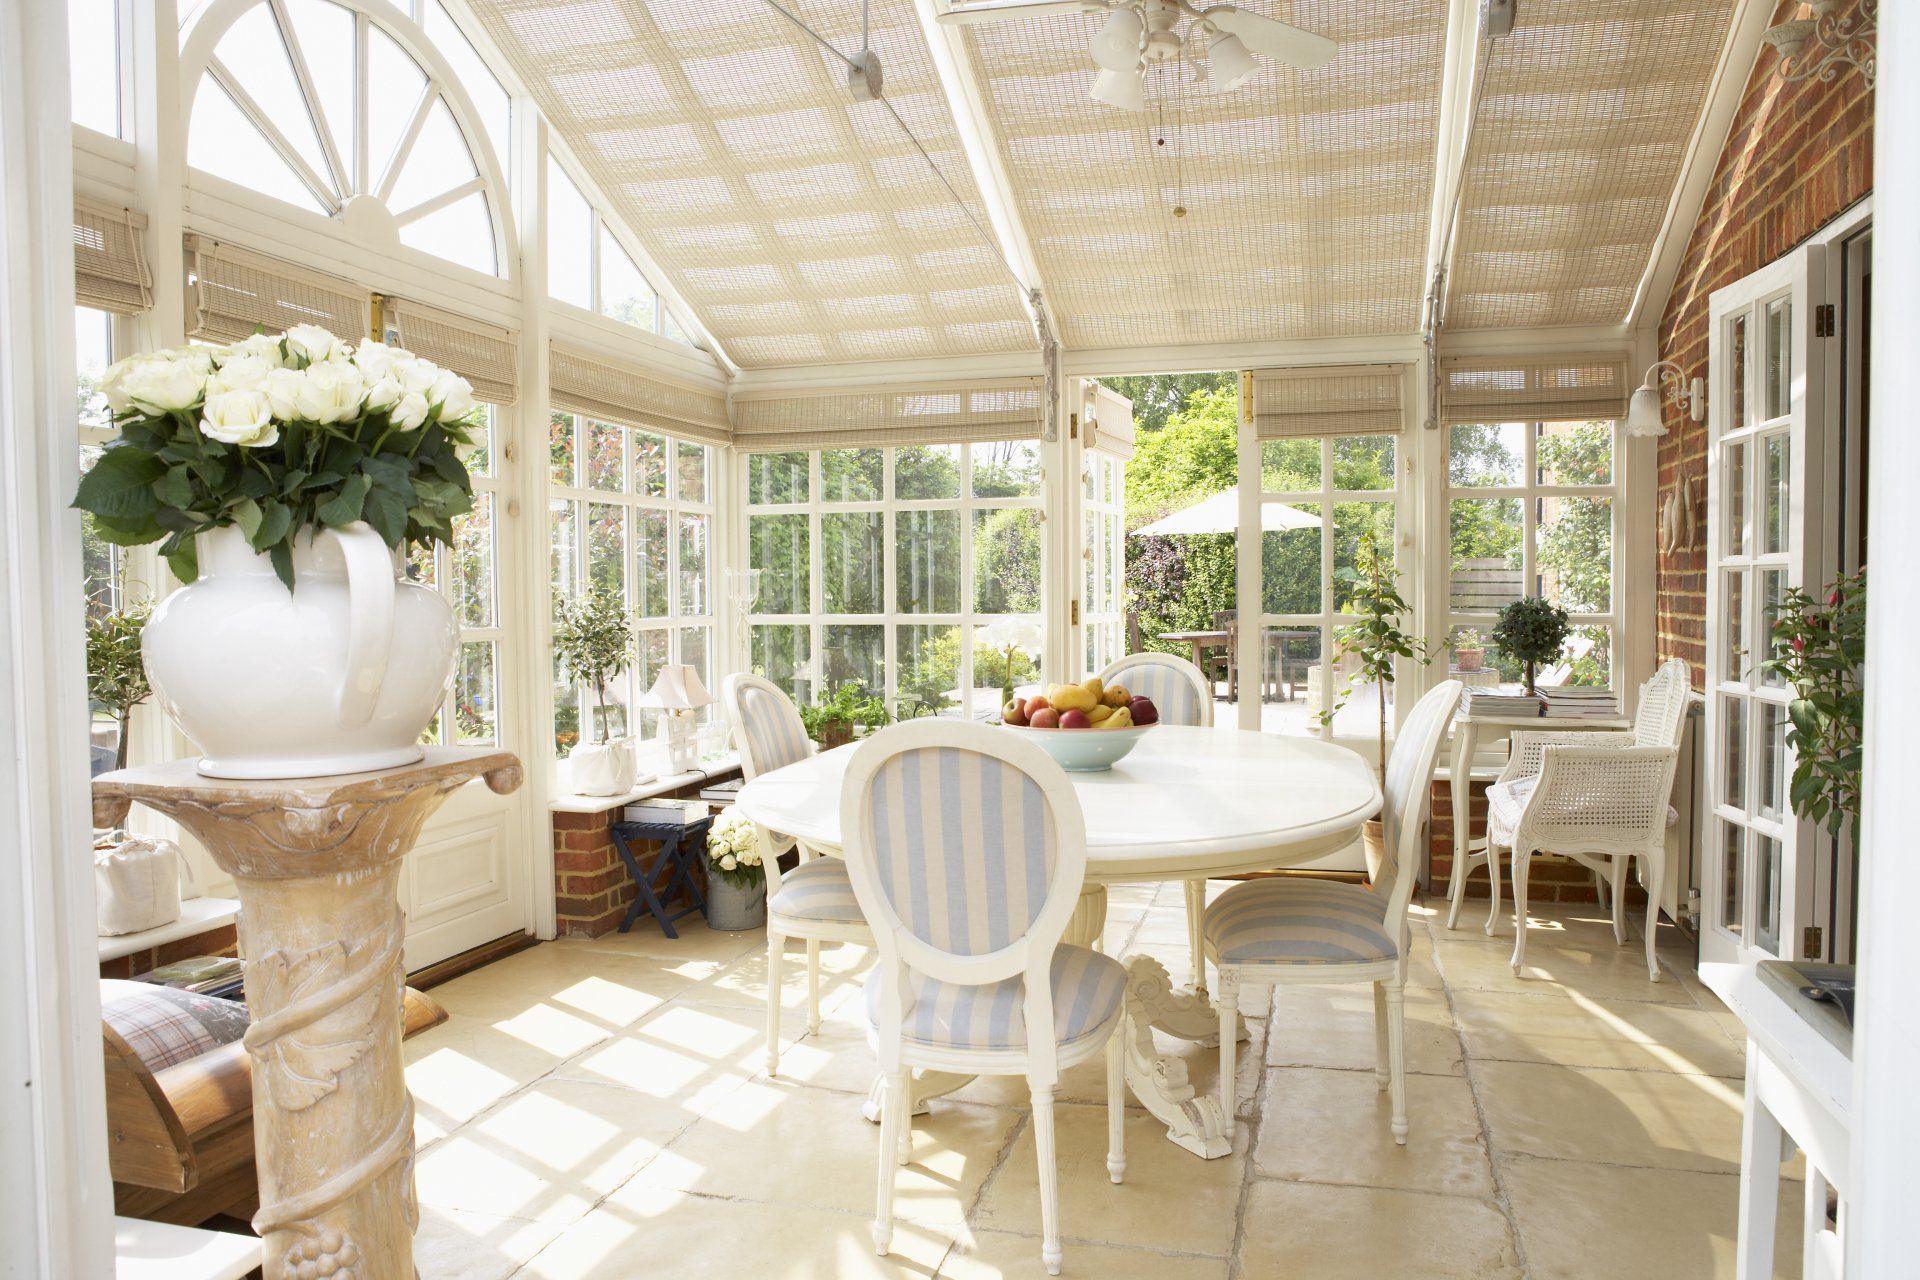 Modern Conservatory with Antique-Inspired Decor